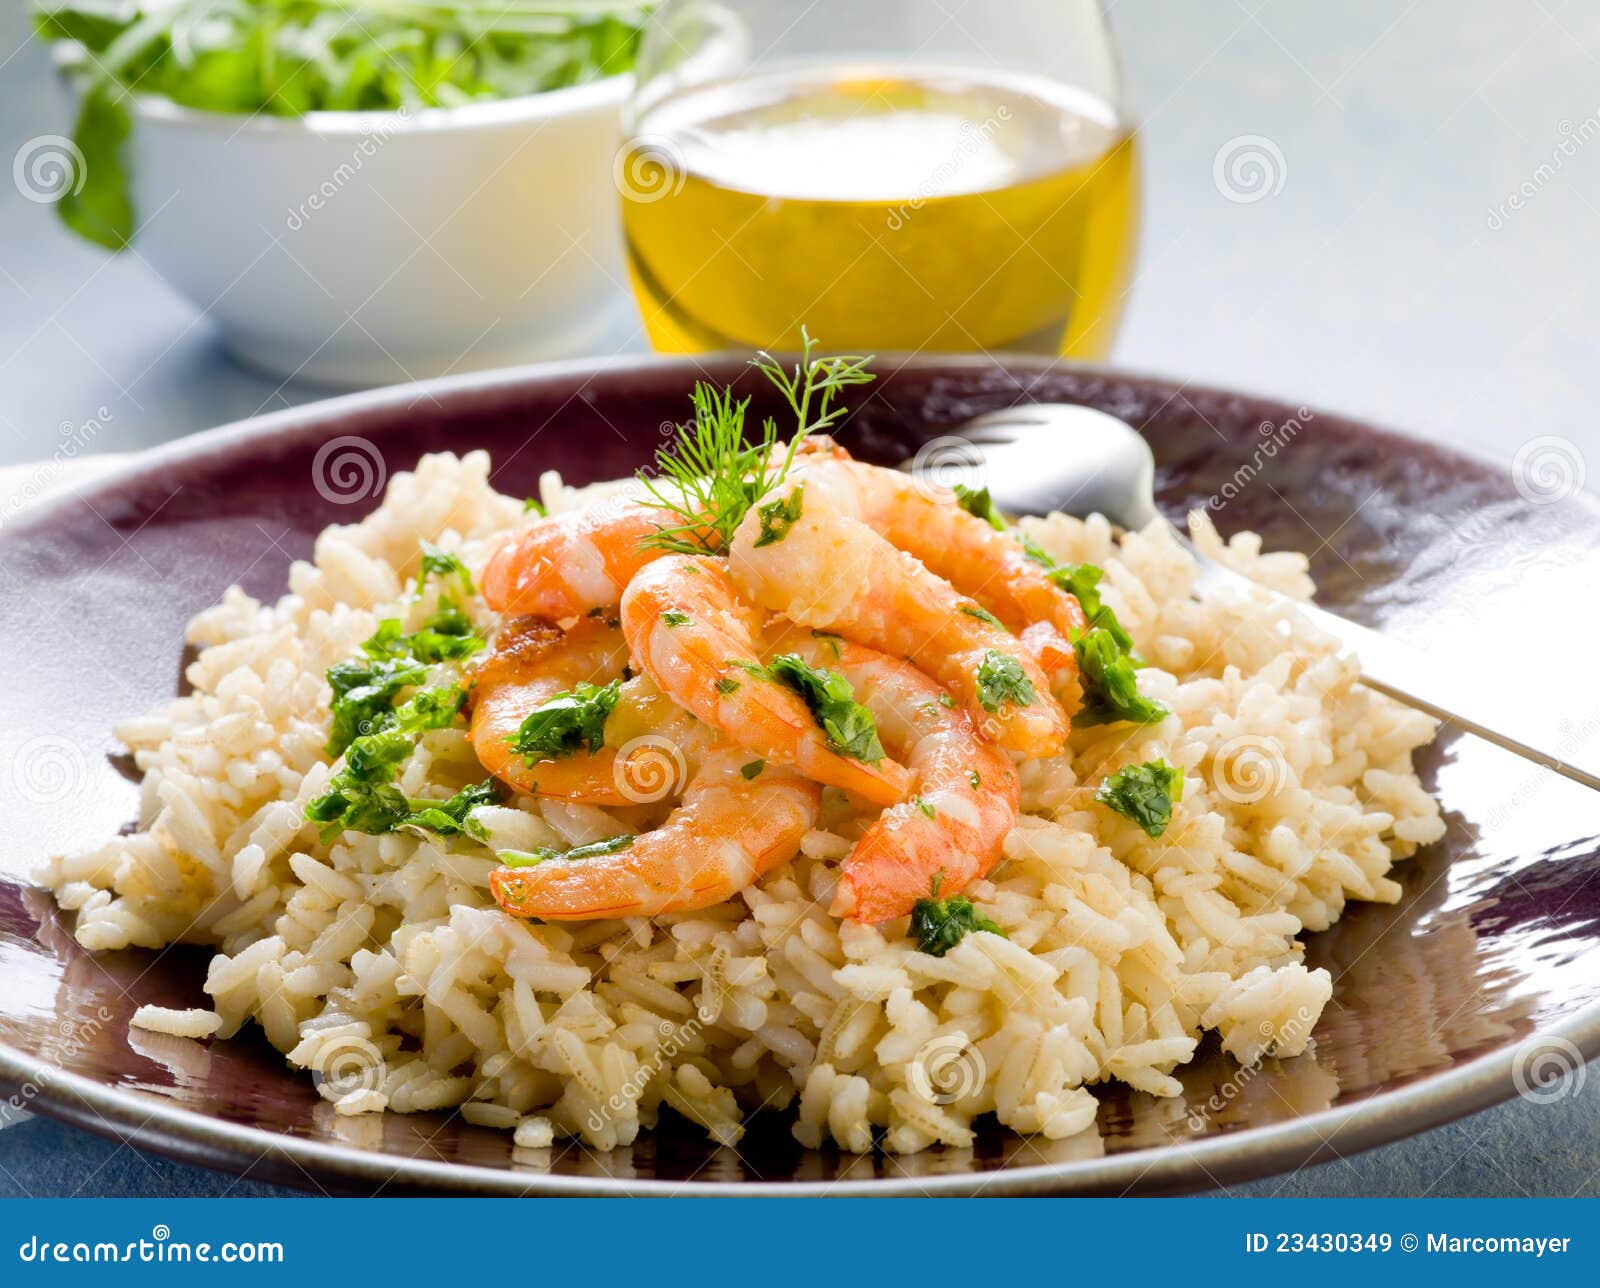 brown rice with shrimp and arugula